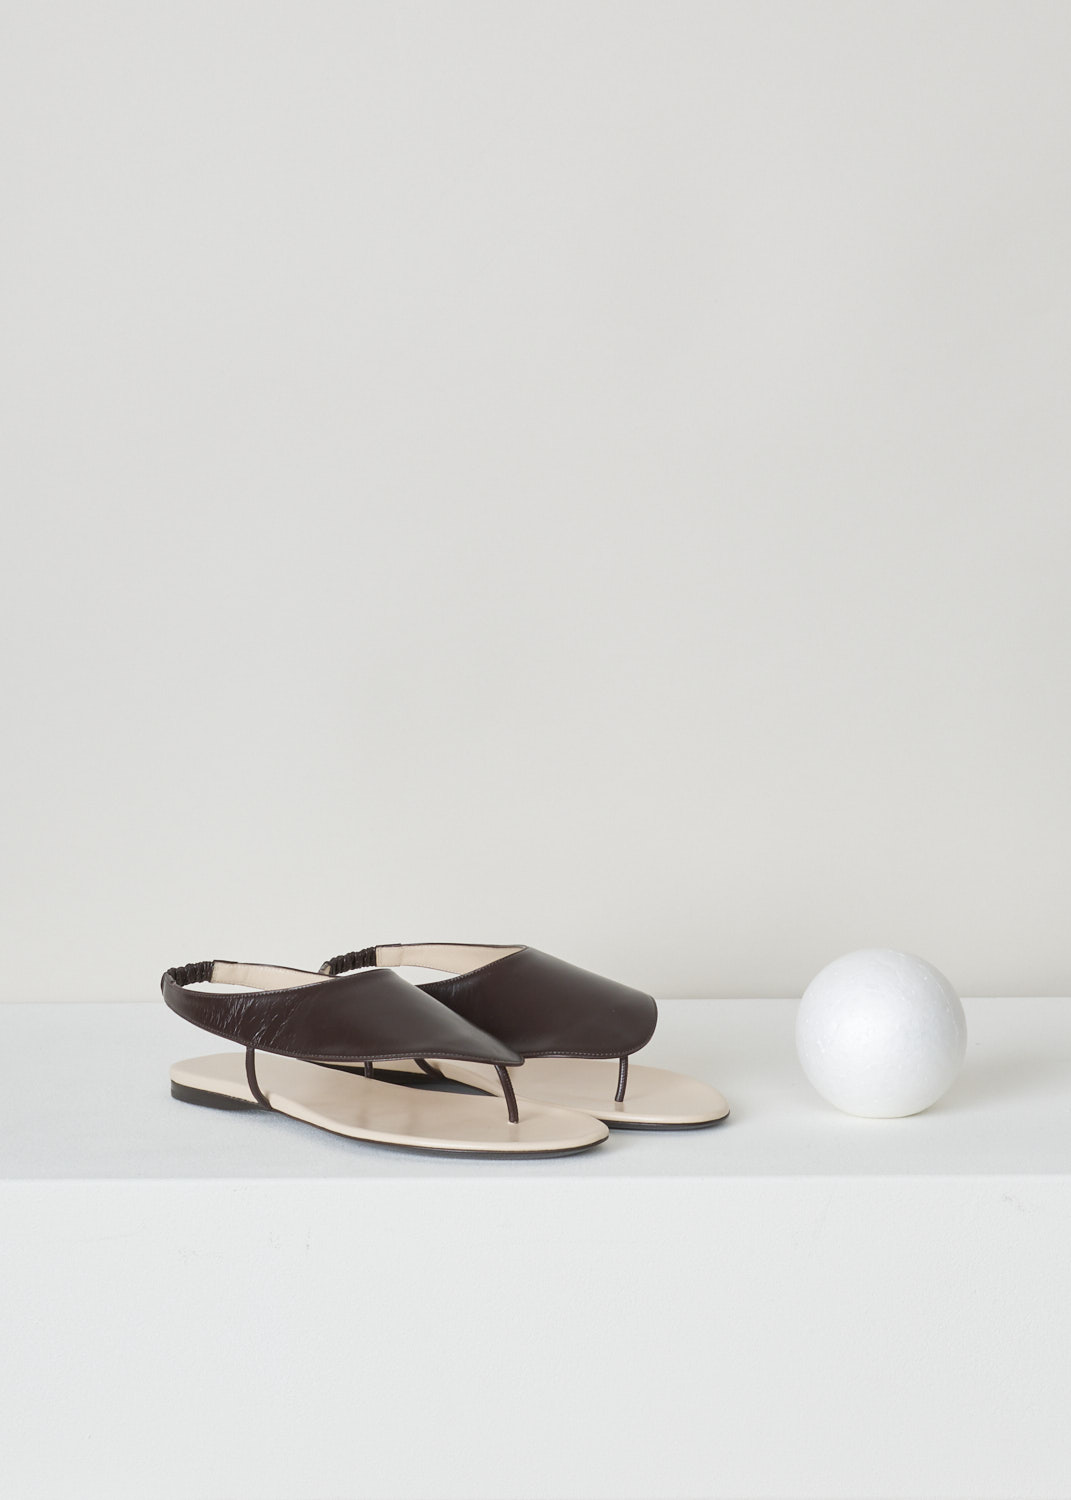 The Row, Dark brown ravello thong sandal, F1155_L35_DBR, brown, front, Ravelo slip-on sandals from The Row. Coloured to a lovely shade of dark brown. Featuring a round and open toe vamp and comes with an elastic slingback strap. 